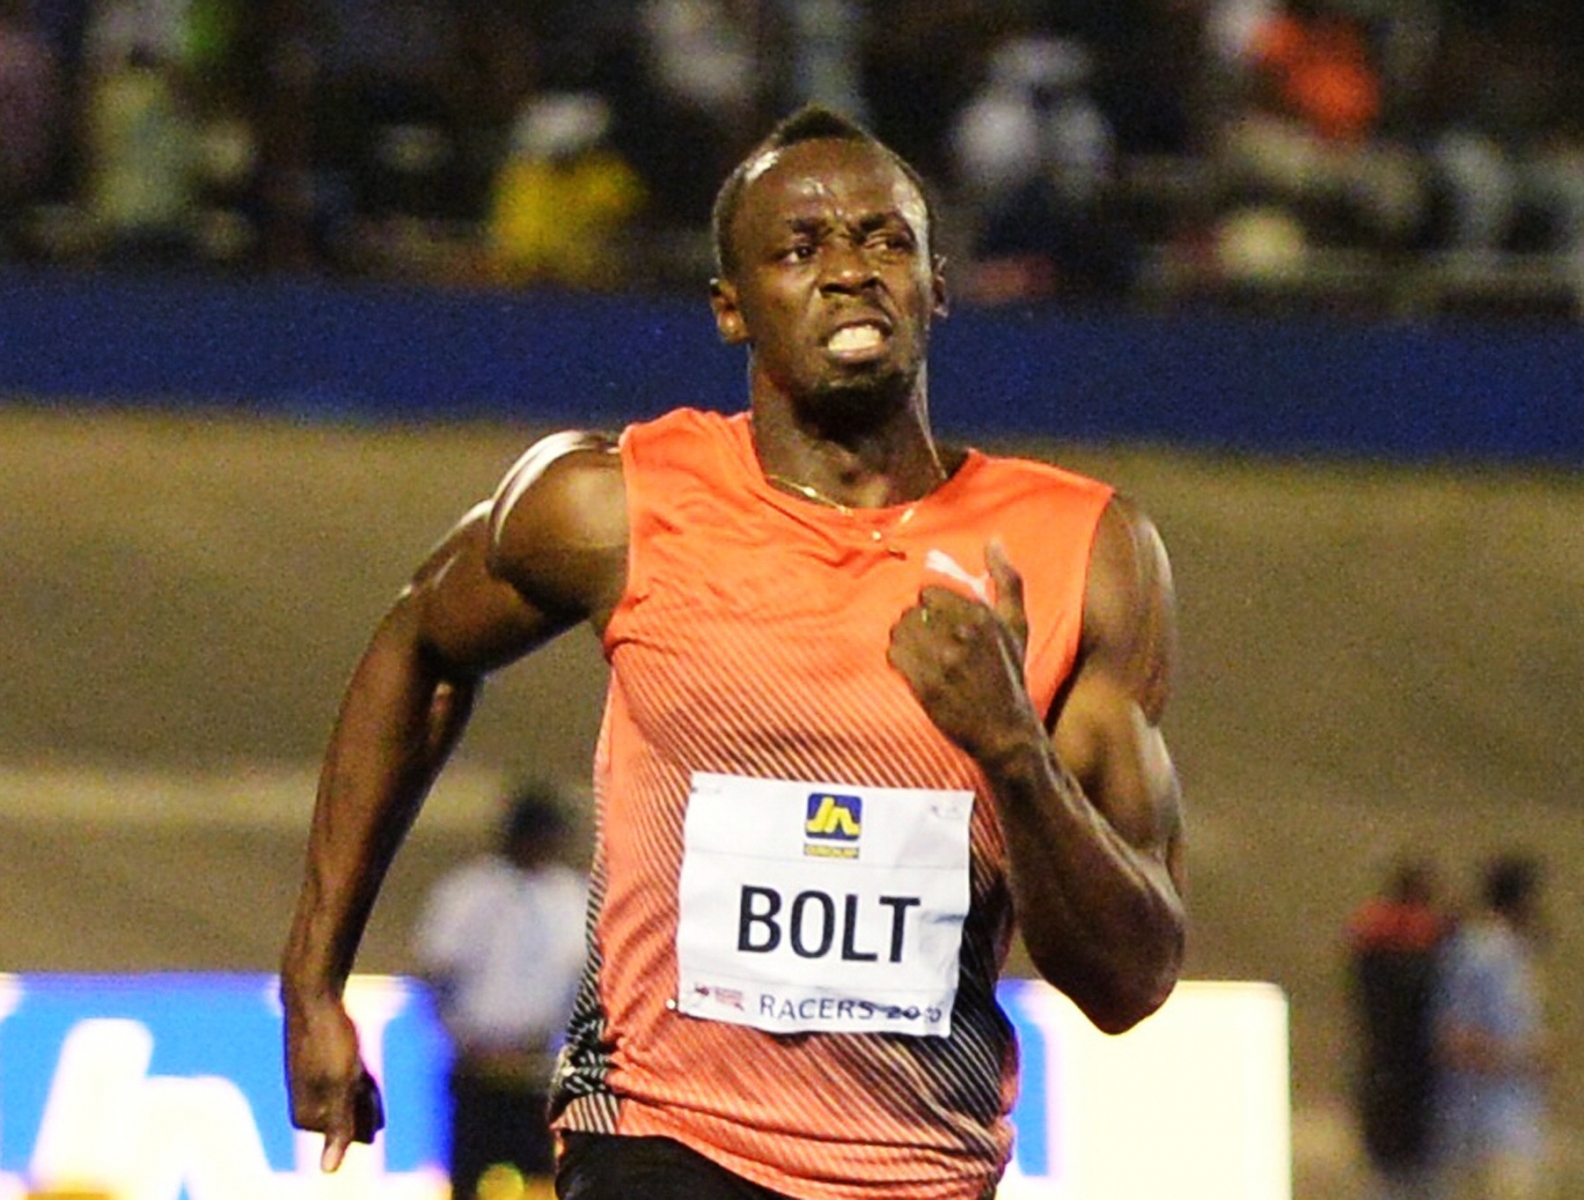 Usain Bolt, of Jamaica, wins the 100-meter final ahead of Yohan Blake and Asafa Powell, both of Jamaica, in the Racers Grand Prix track and field event at the National Stadium in Kingston, Jamaica, Saturday, June 11, 2016. (AP Photo/Collin Reid)bolt RACERS GRAND PRIX TRACK AND FIELD